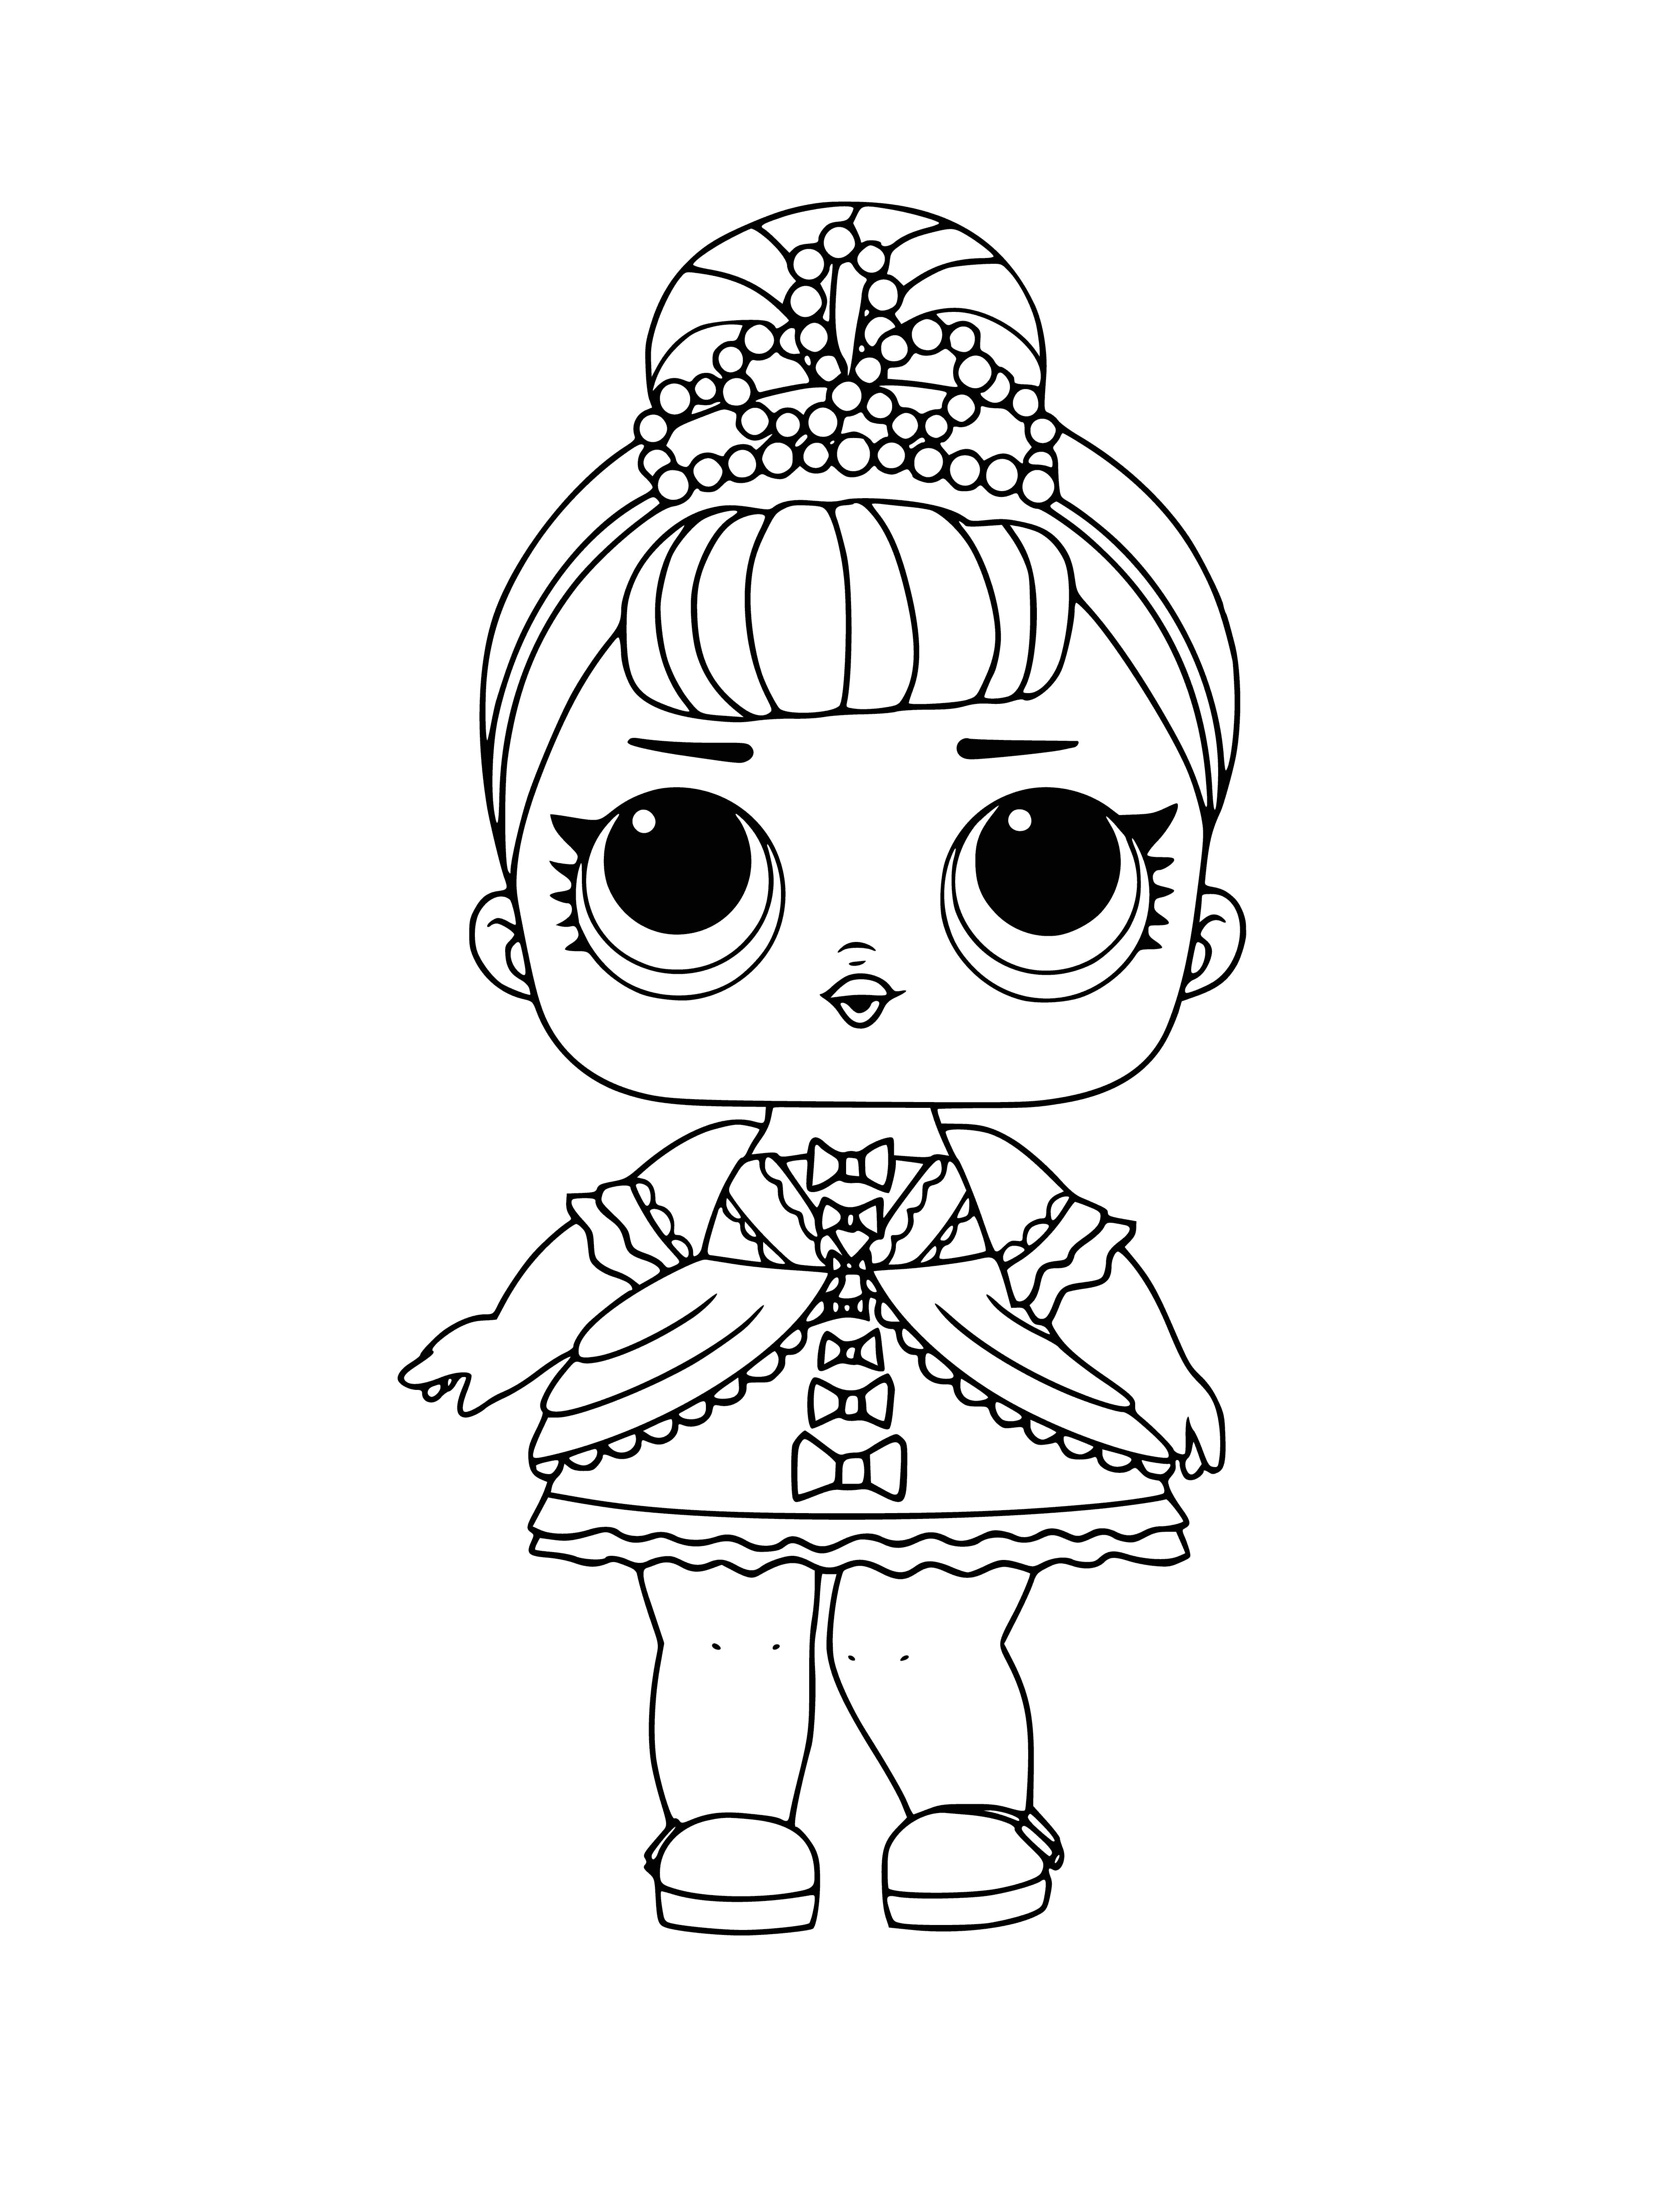 coloring page: Pretty doll in blue & white dress holds white purse & has blonde hair & blue eyes.